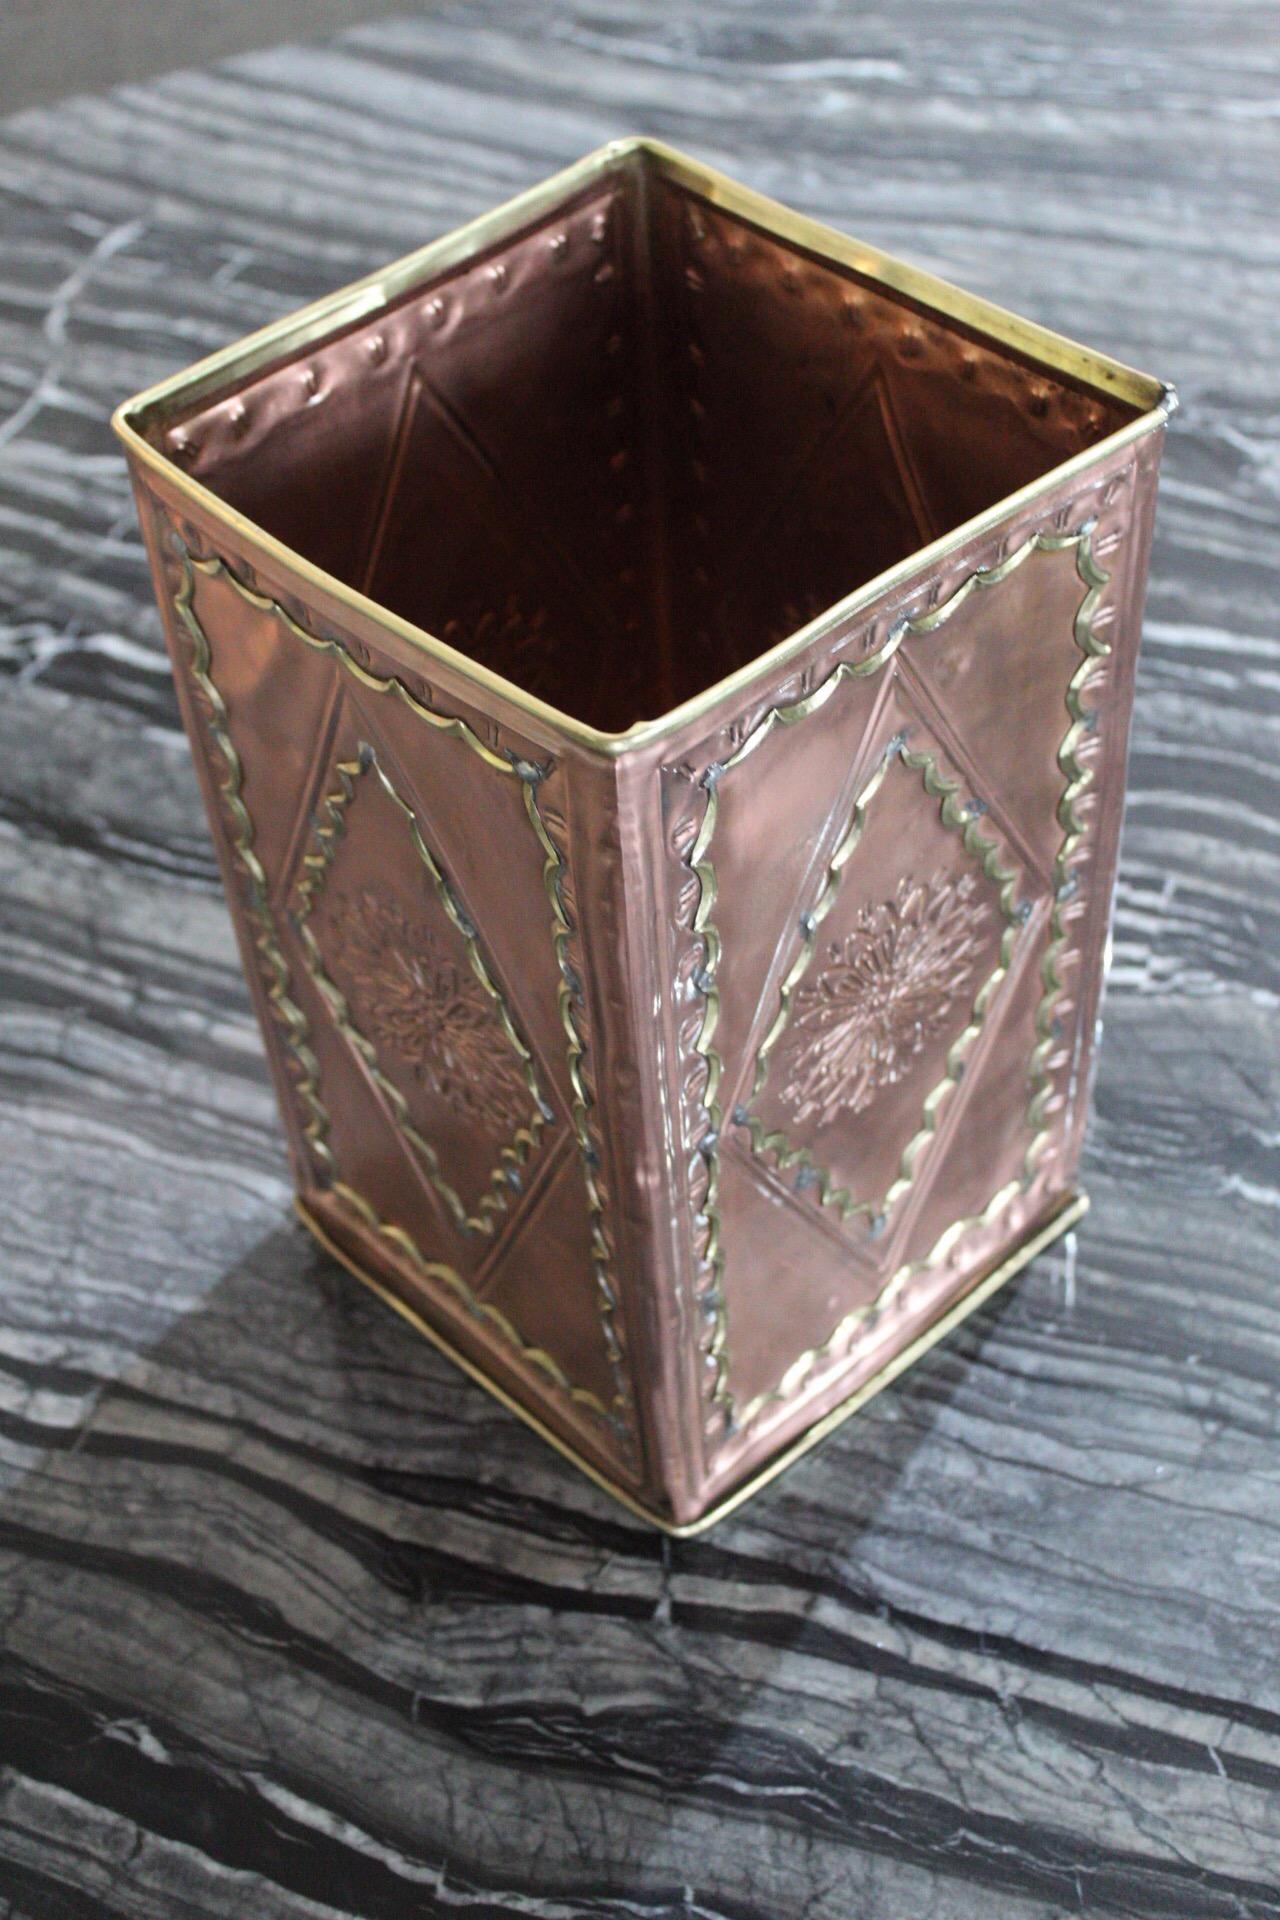 To your consideration one of her first pieces, this beautiful hand hammered copper and brass midcentury vase. Made and signed by Gene Byron, a Canadian artist, who moved to Marfil, Guanajuato, Mexico with his Spanish husband in the 1950s.
The